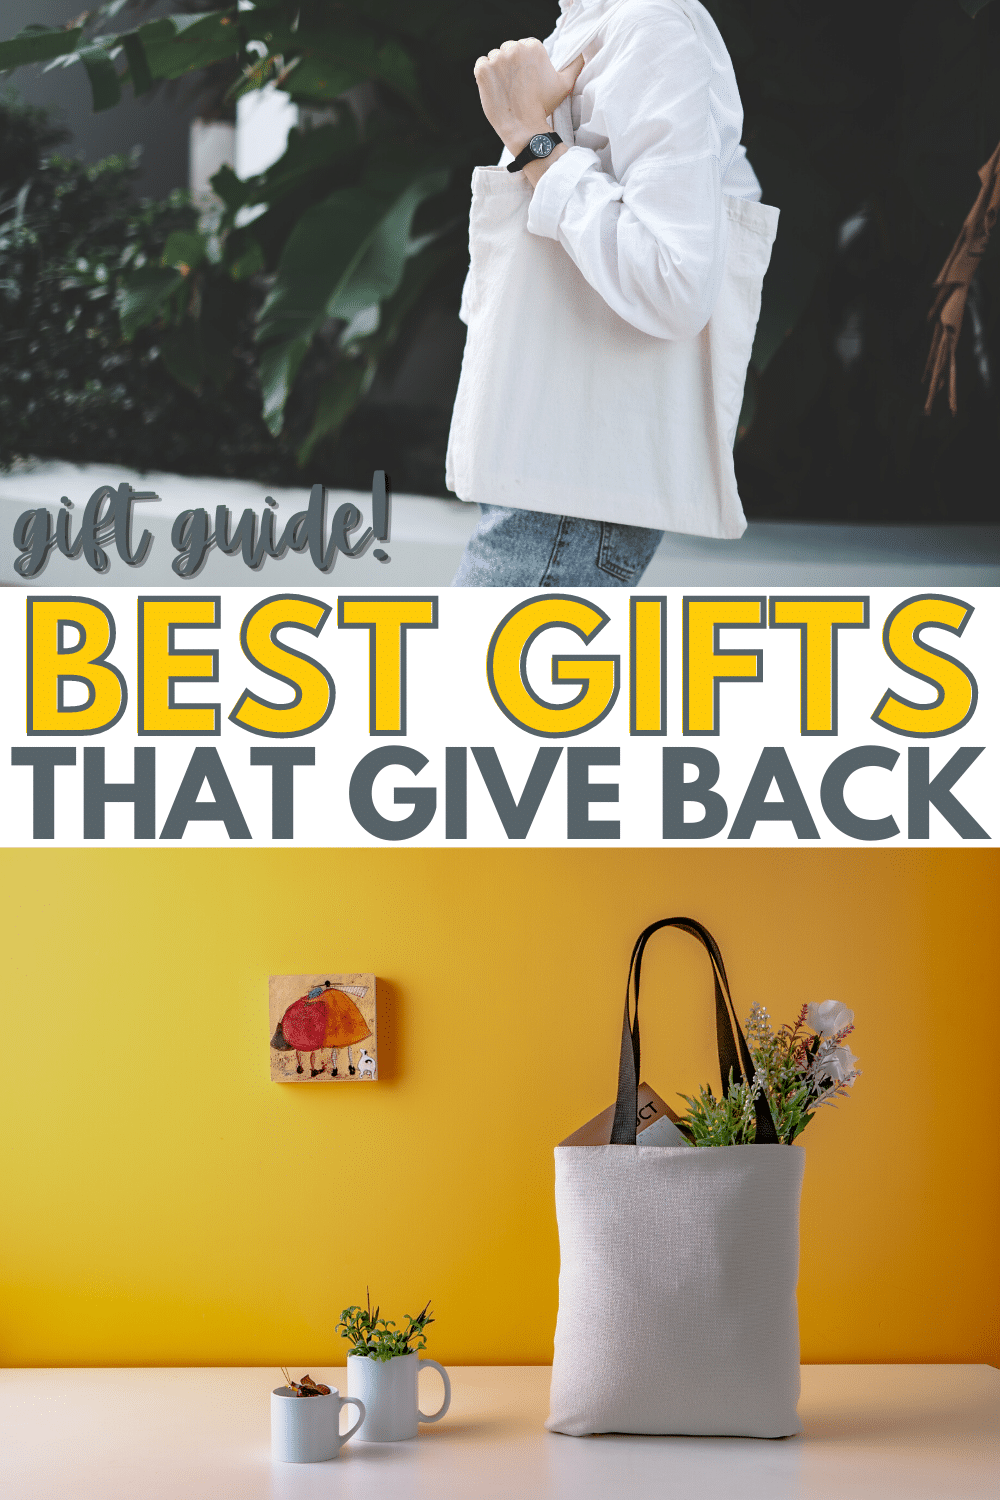 If you want to choose gifts to brighten the lives of the people you care about, here's a collection of some of the best gifts that give back to society. #giftguide #giftideas #giveback via @wondermomwannab